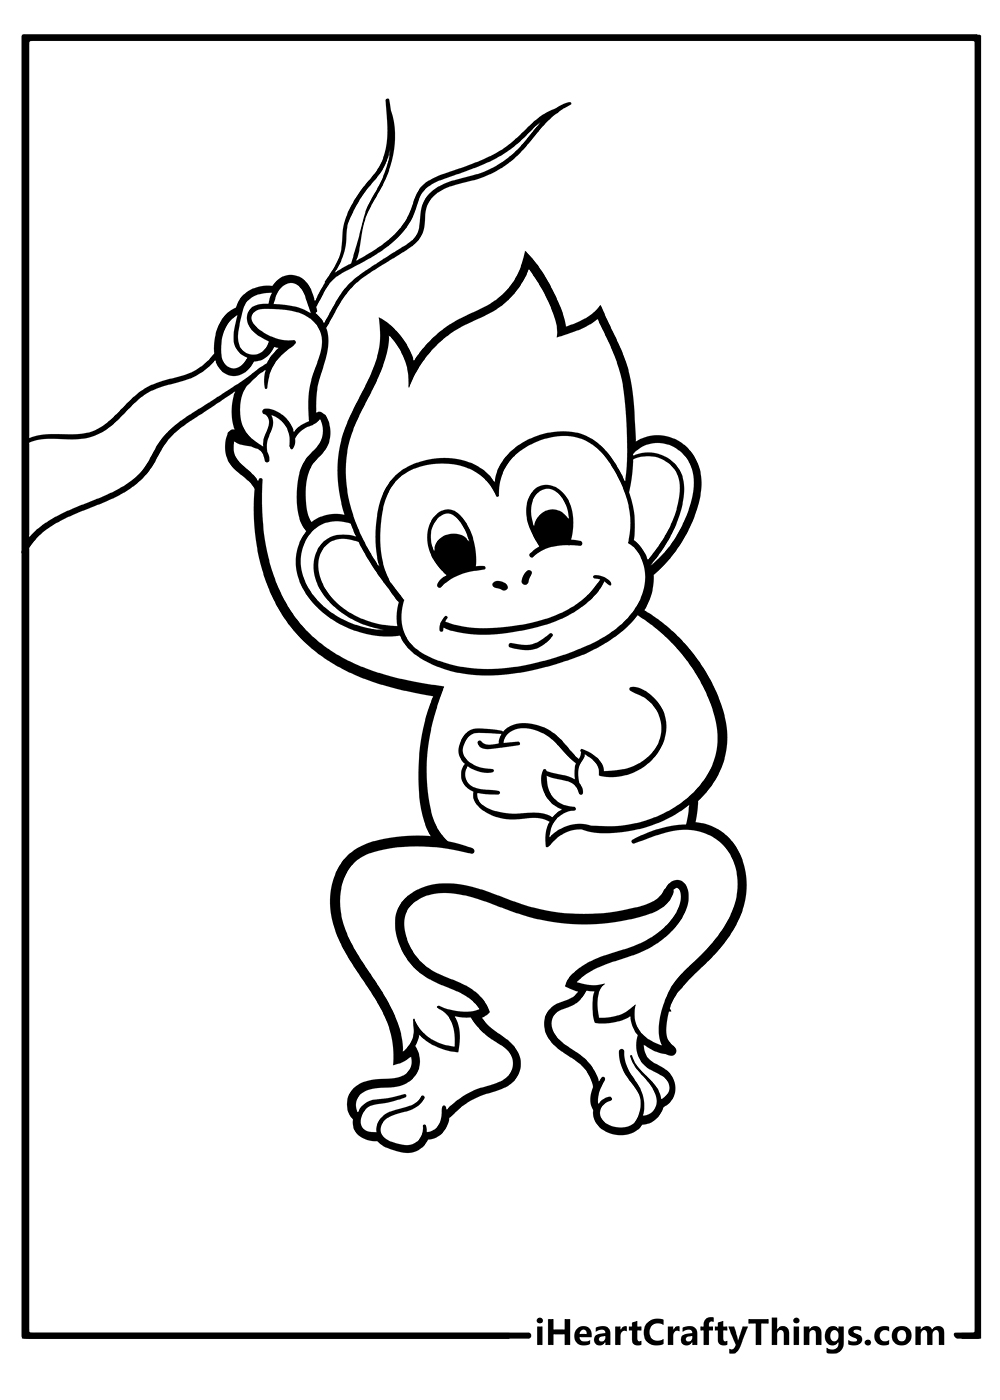 Monkey Coloring Pages for preschoolers free printable